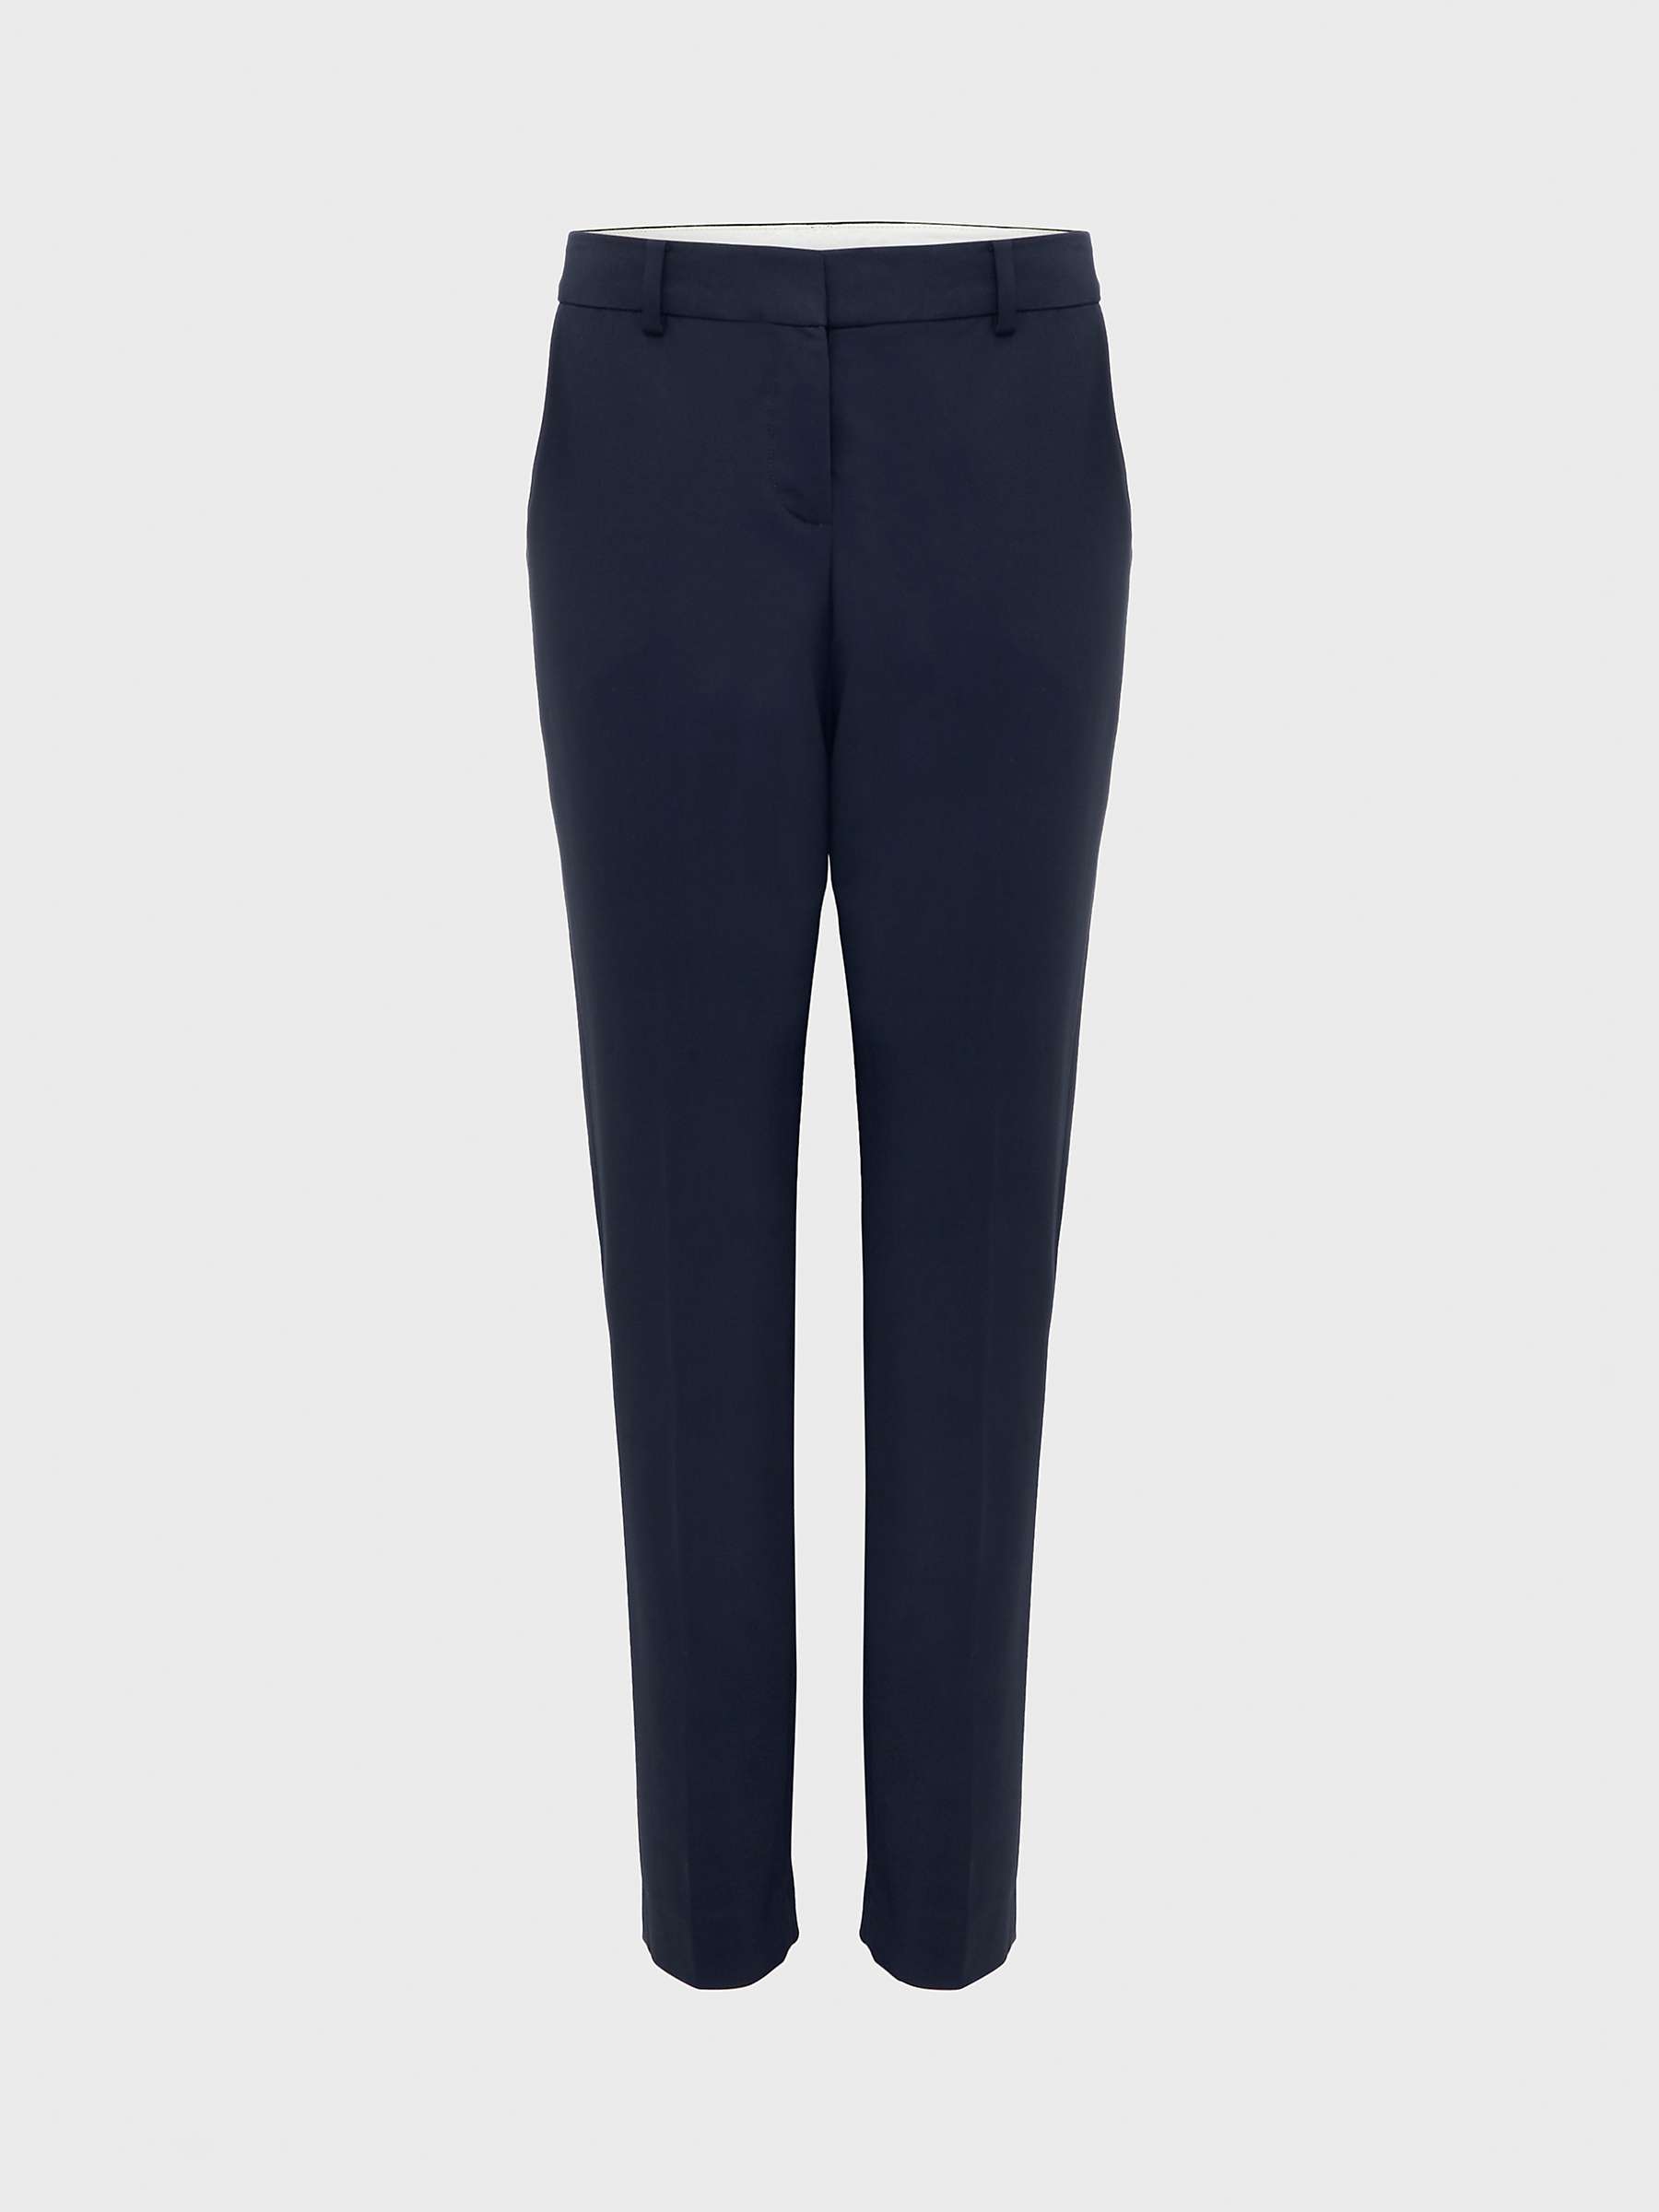 Buy Hobbs Quin Cotton Blend Trousers, Navy Online at johnlewis.com